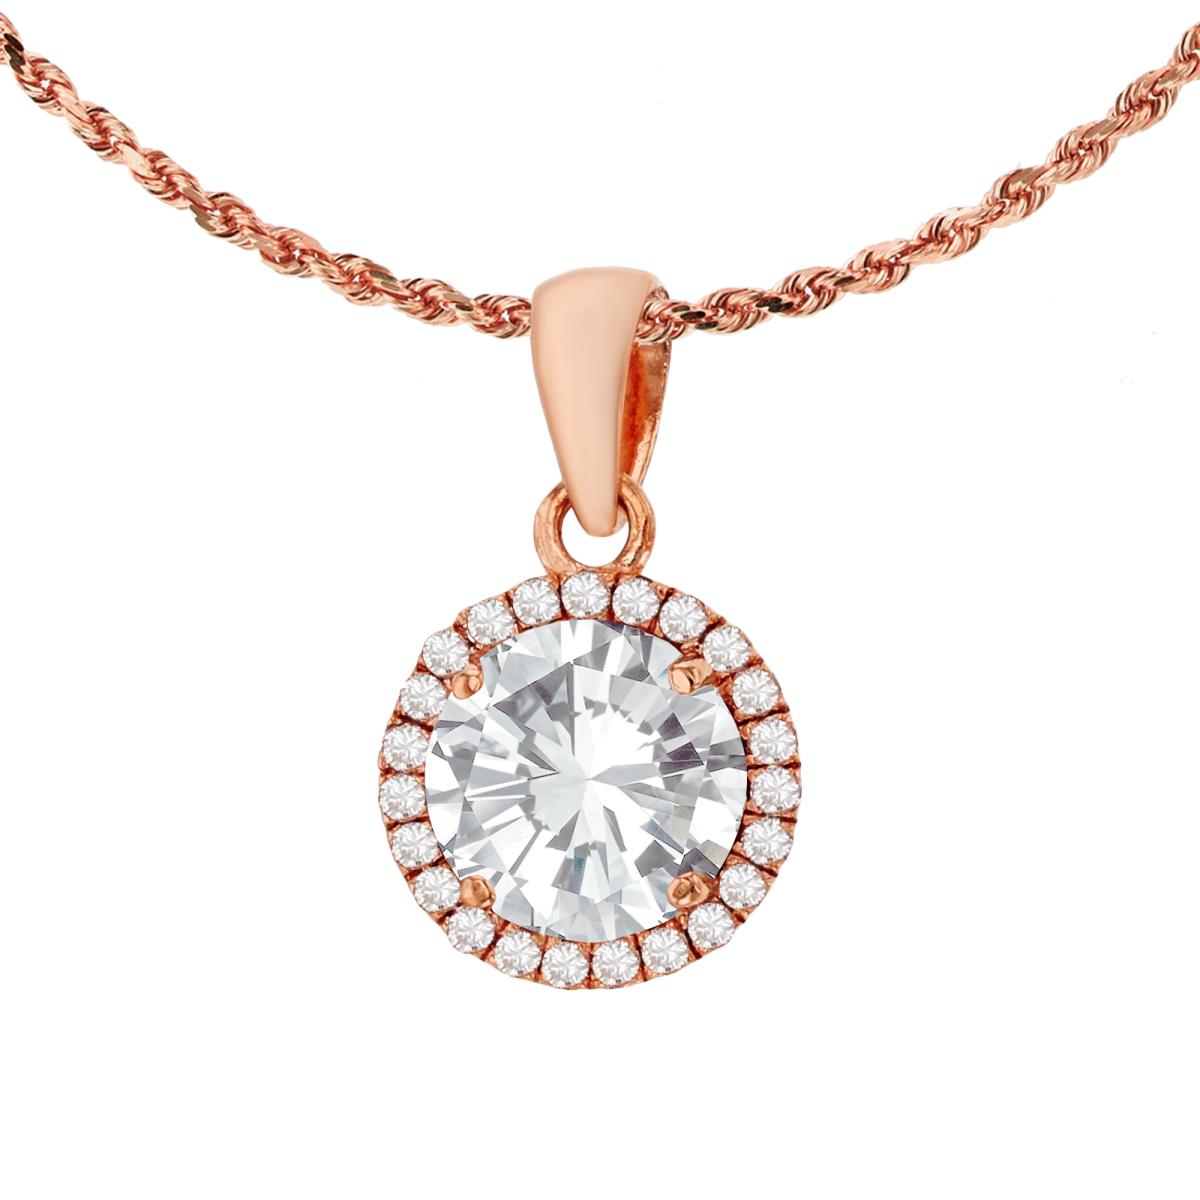 14K Rose Gold 7mm Round White Topaz & 0.12 CTTW Diamond Halo 18" Rope Chain Necklace